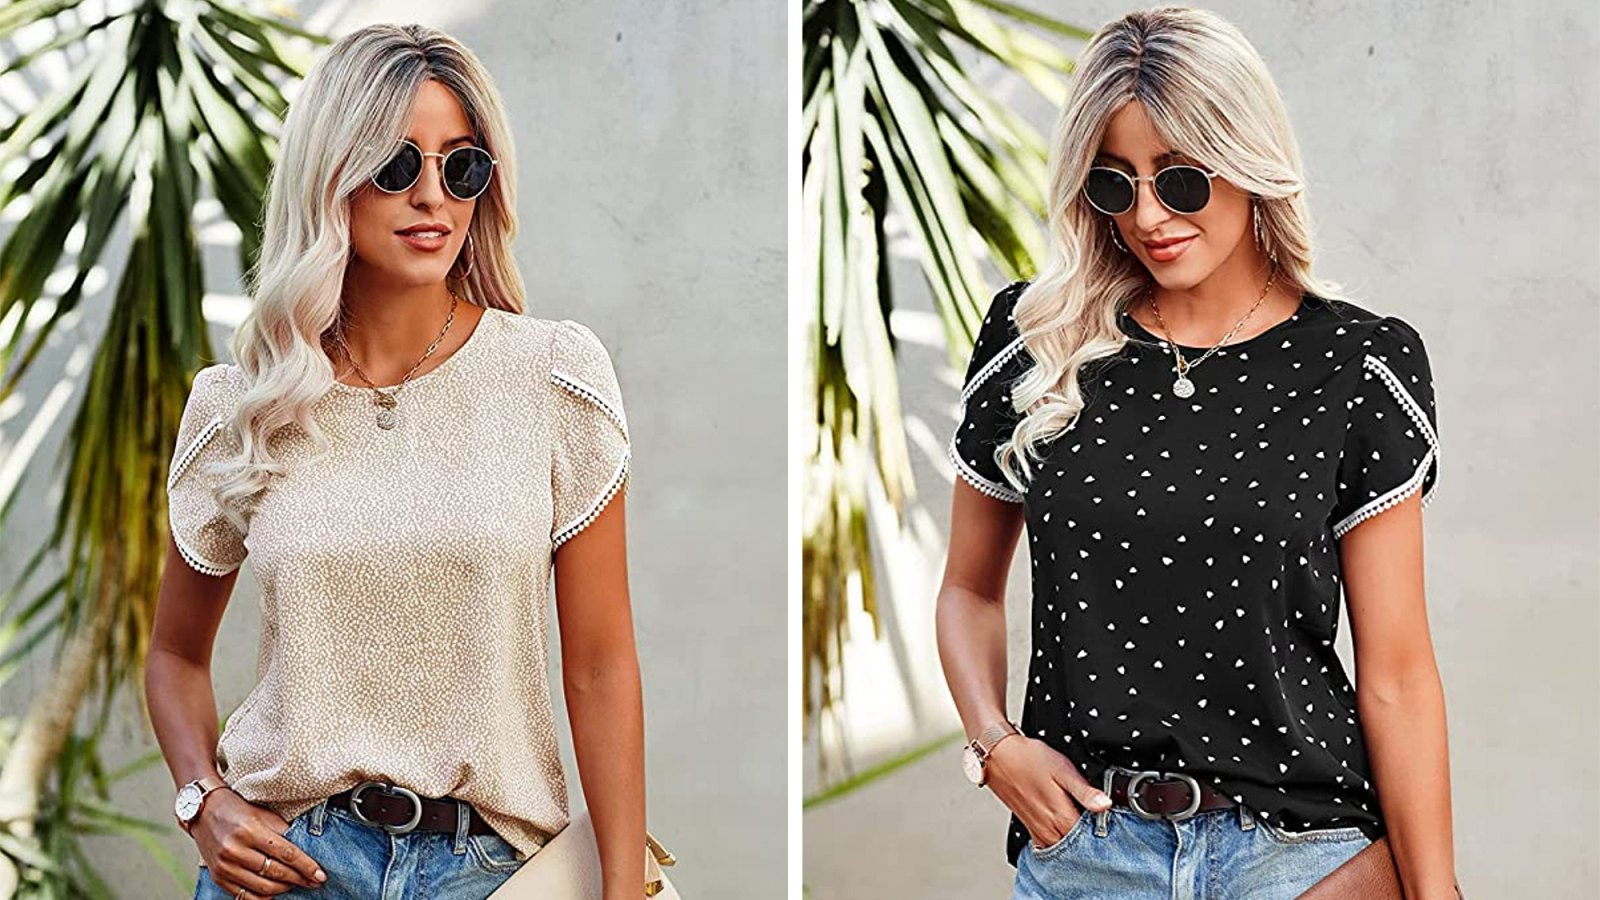 Simple Top Is Perfect for the Summer